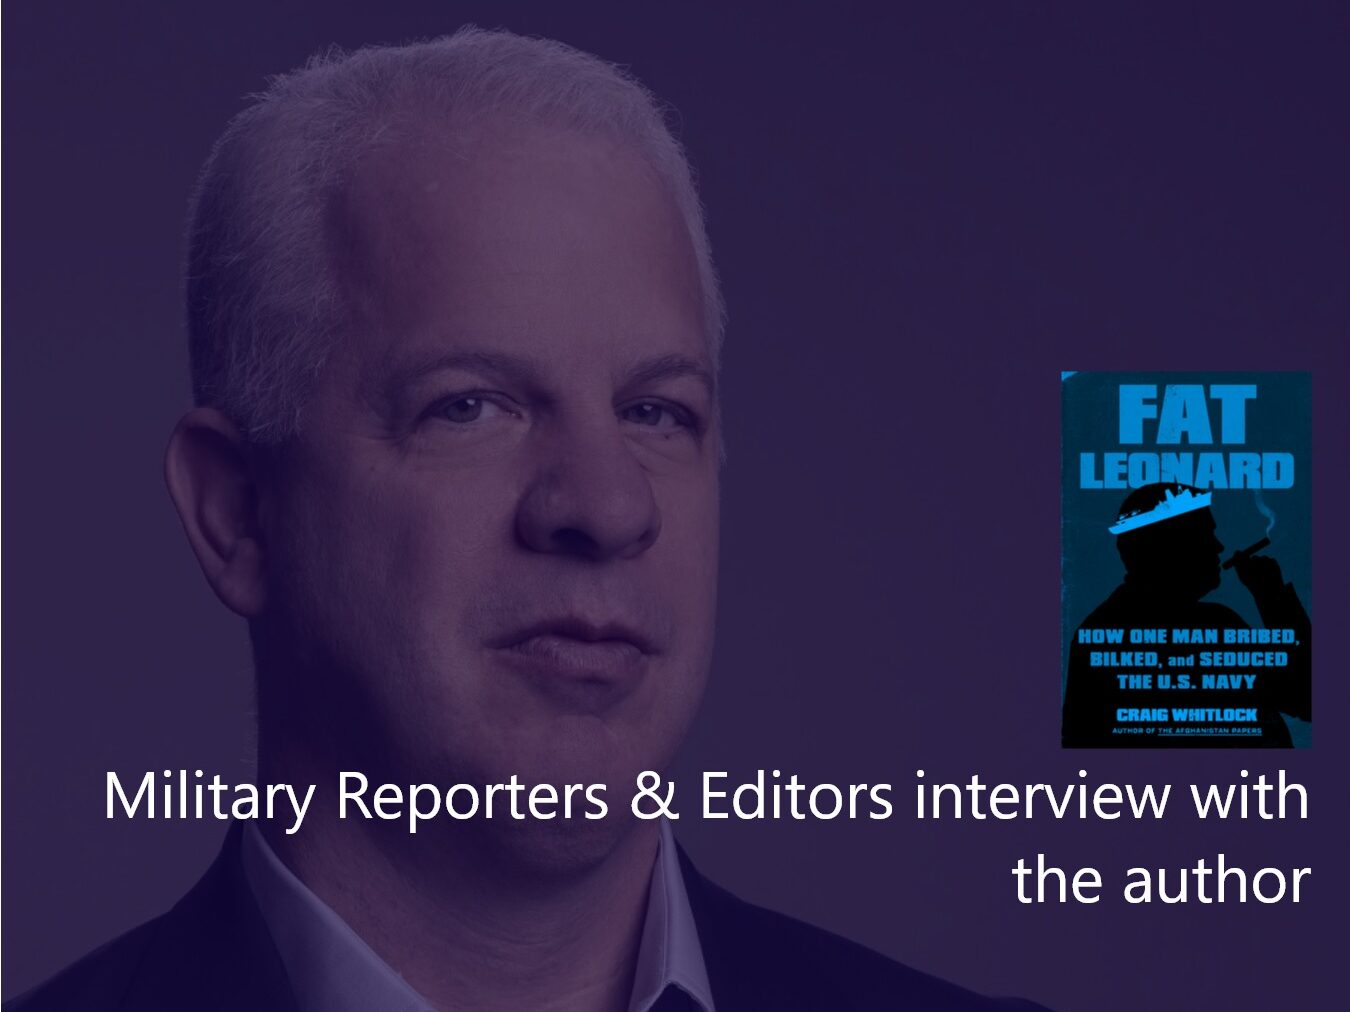 Author Craig Whitlock interview with Military Reporters & Editors